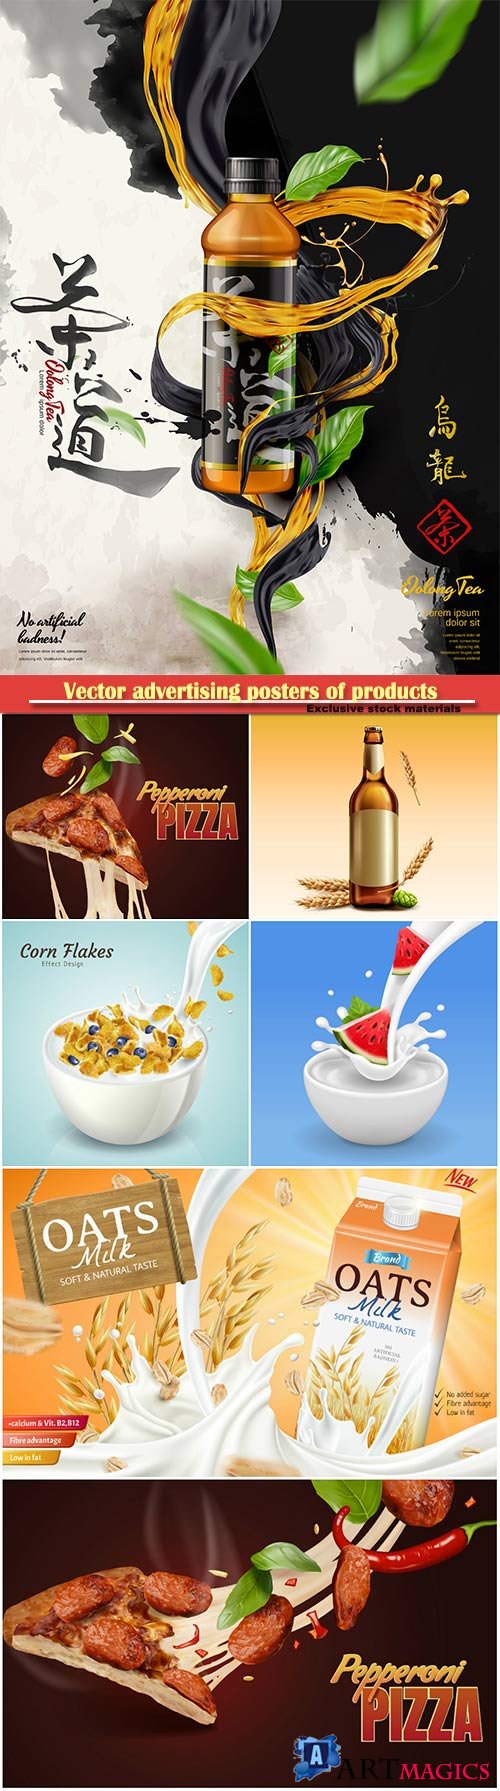 Vector advertising posters of various products